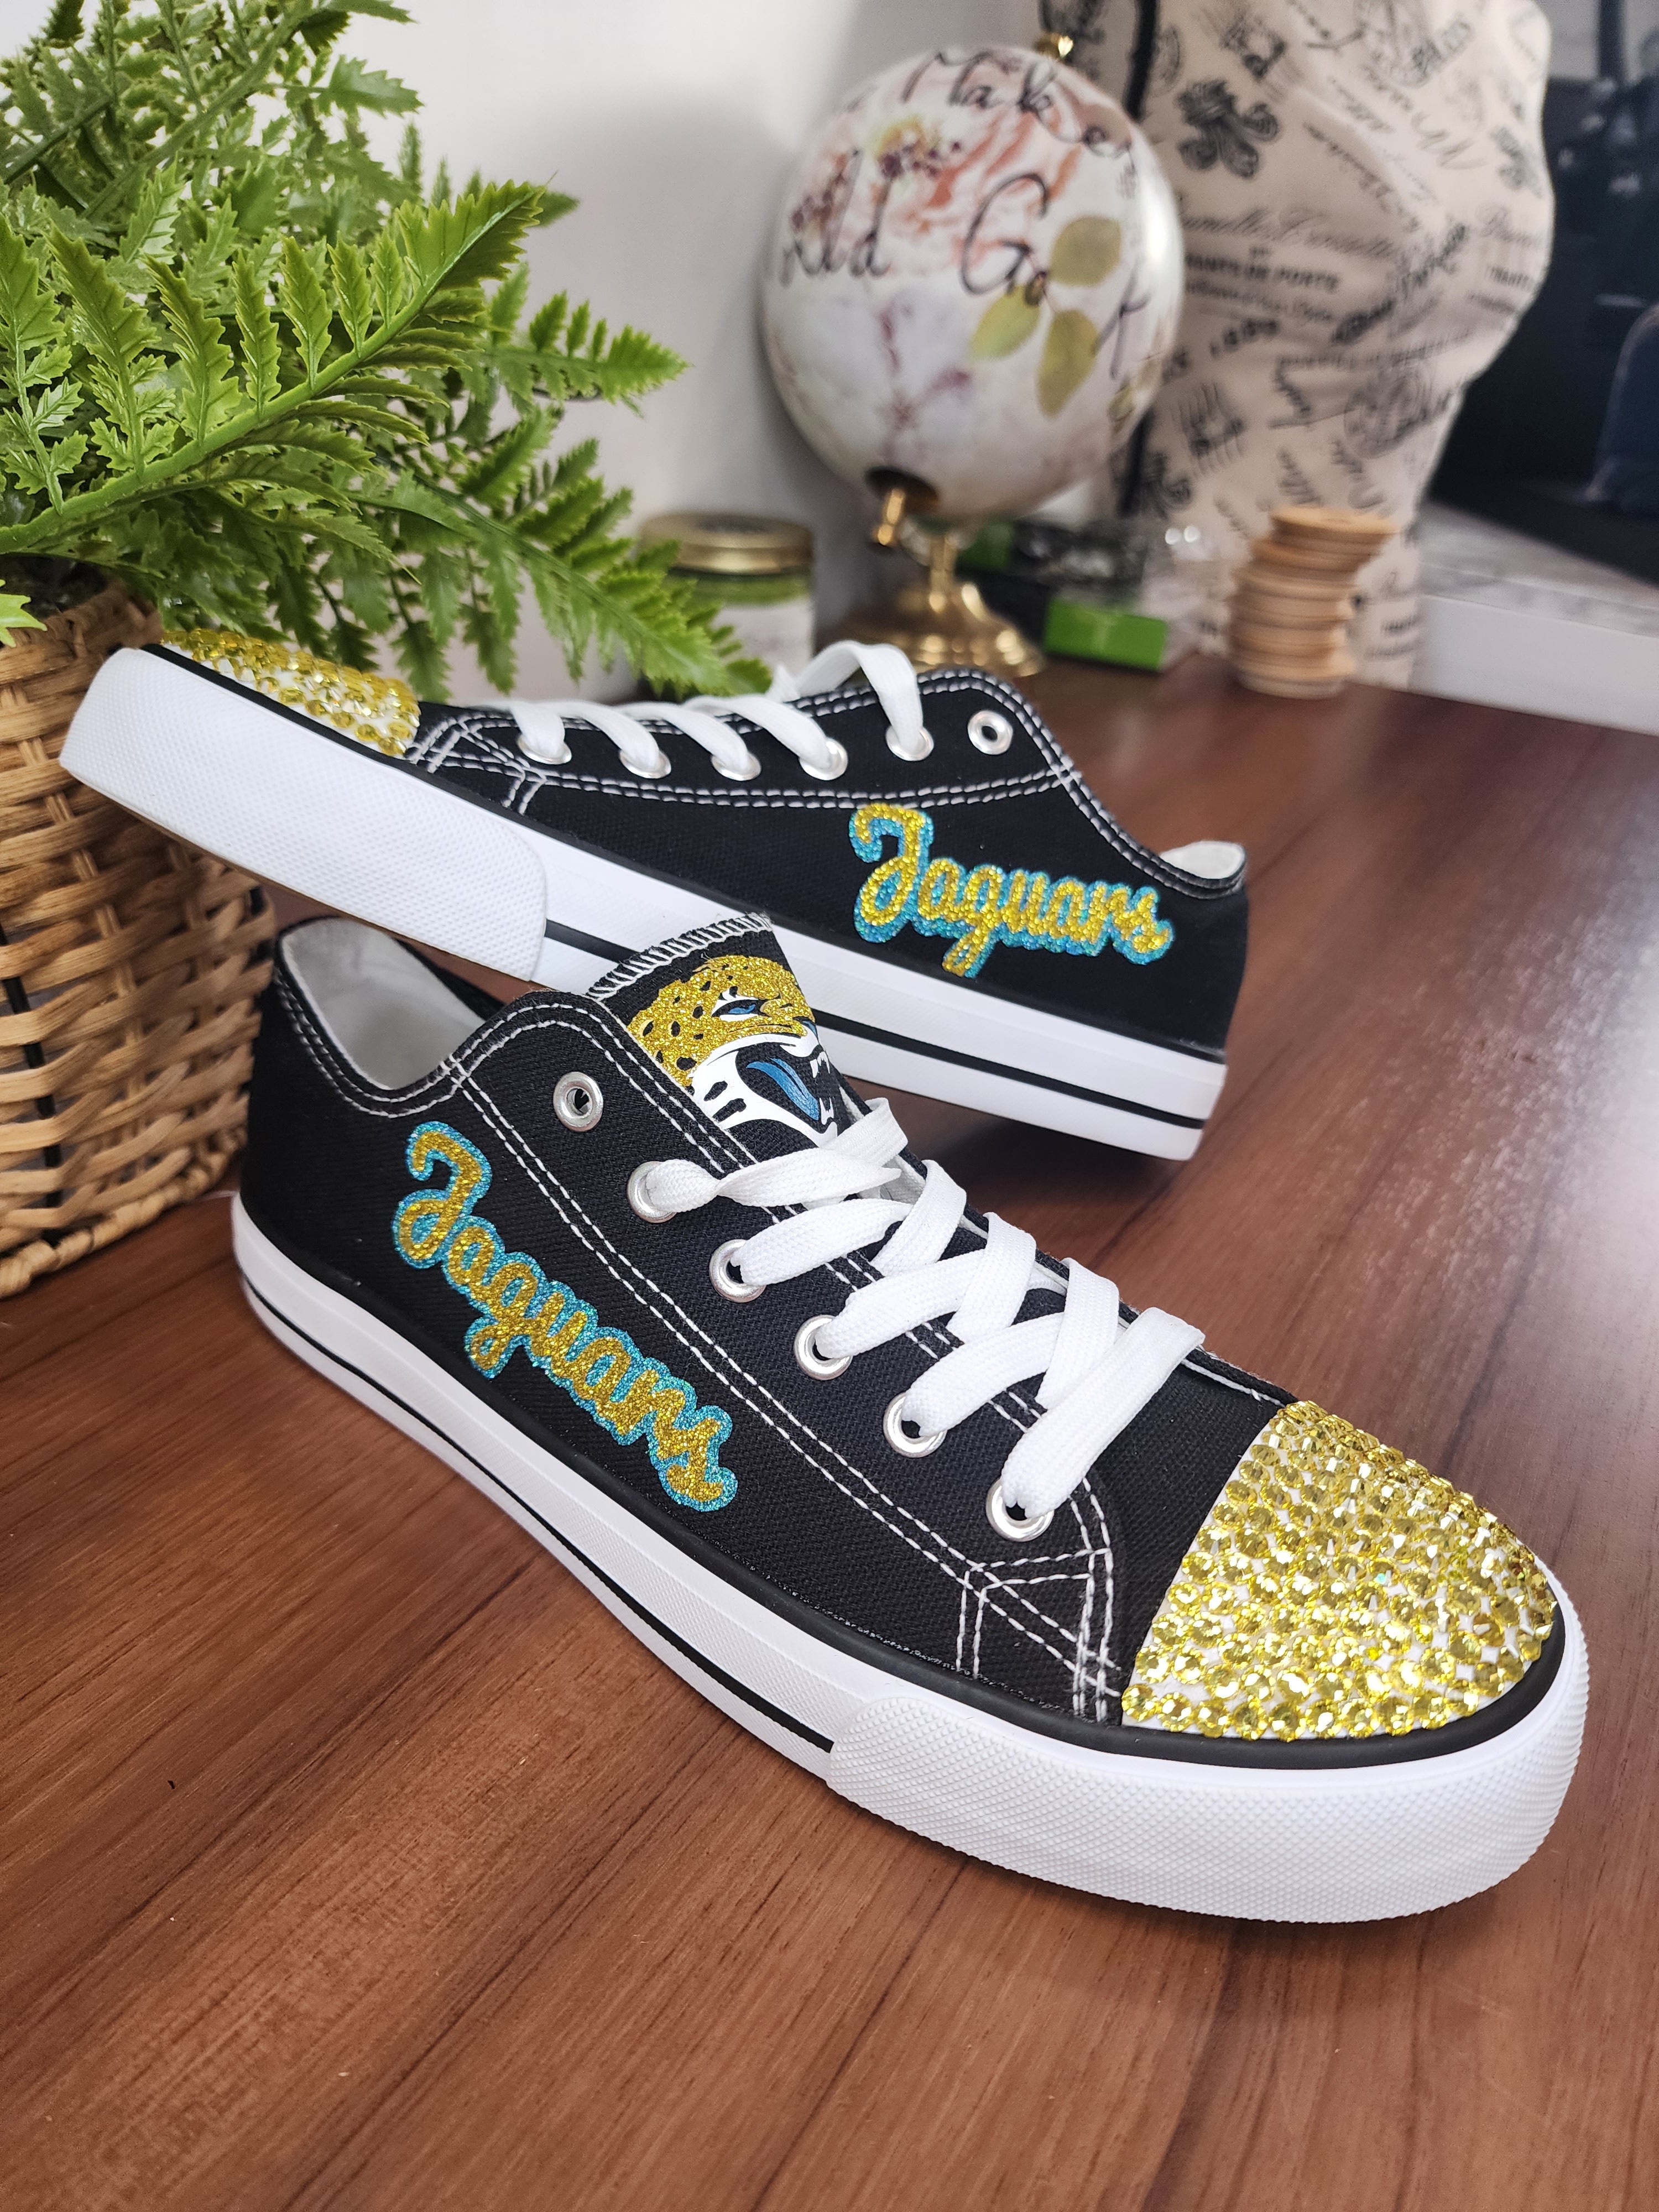 Womens St. Louis Blues Embroidered Custom Converse Size 8 Worn